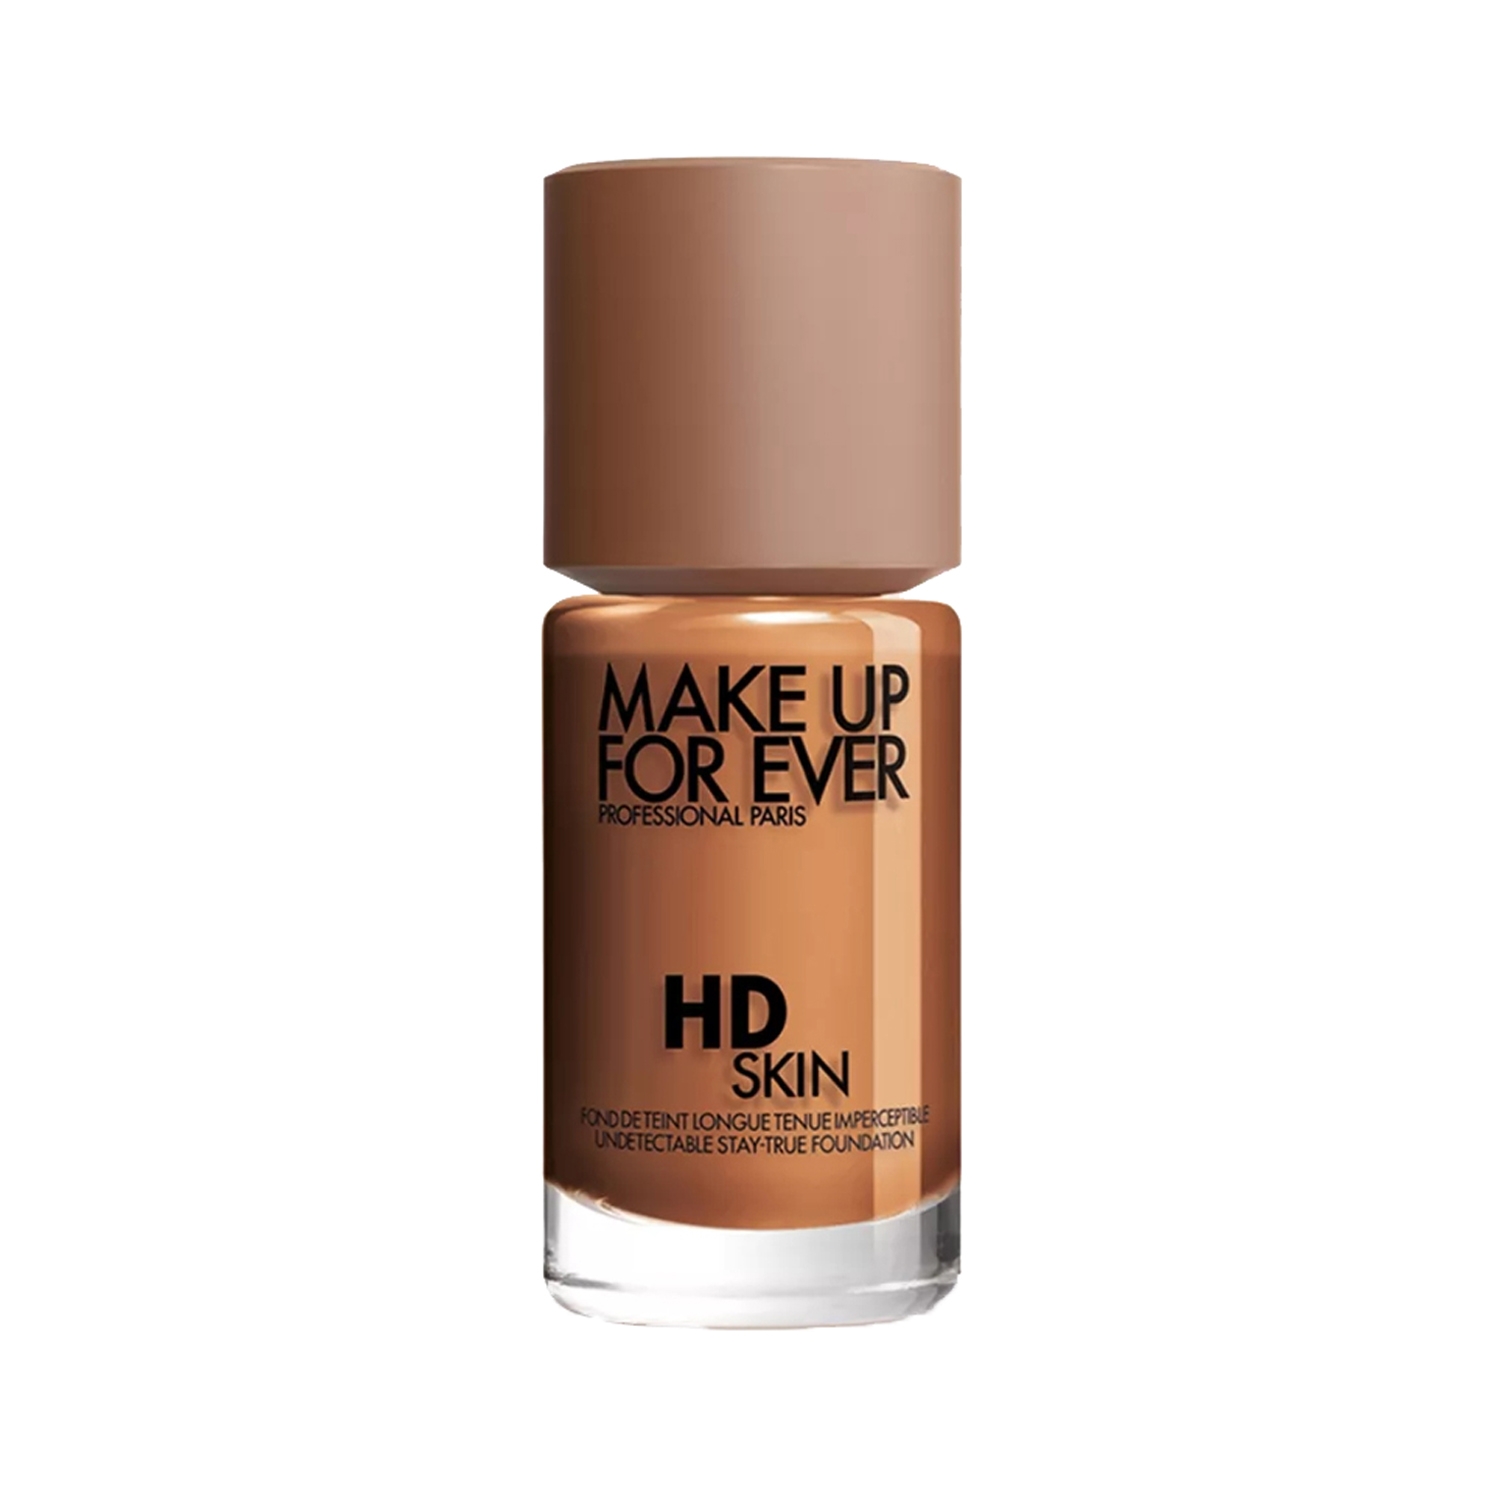 Make Up For Ever | Make Up For Ever HD Skin Undetectable Liquid Foundation - 4Y60 Warm Almond (30ml)